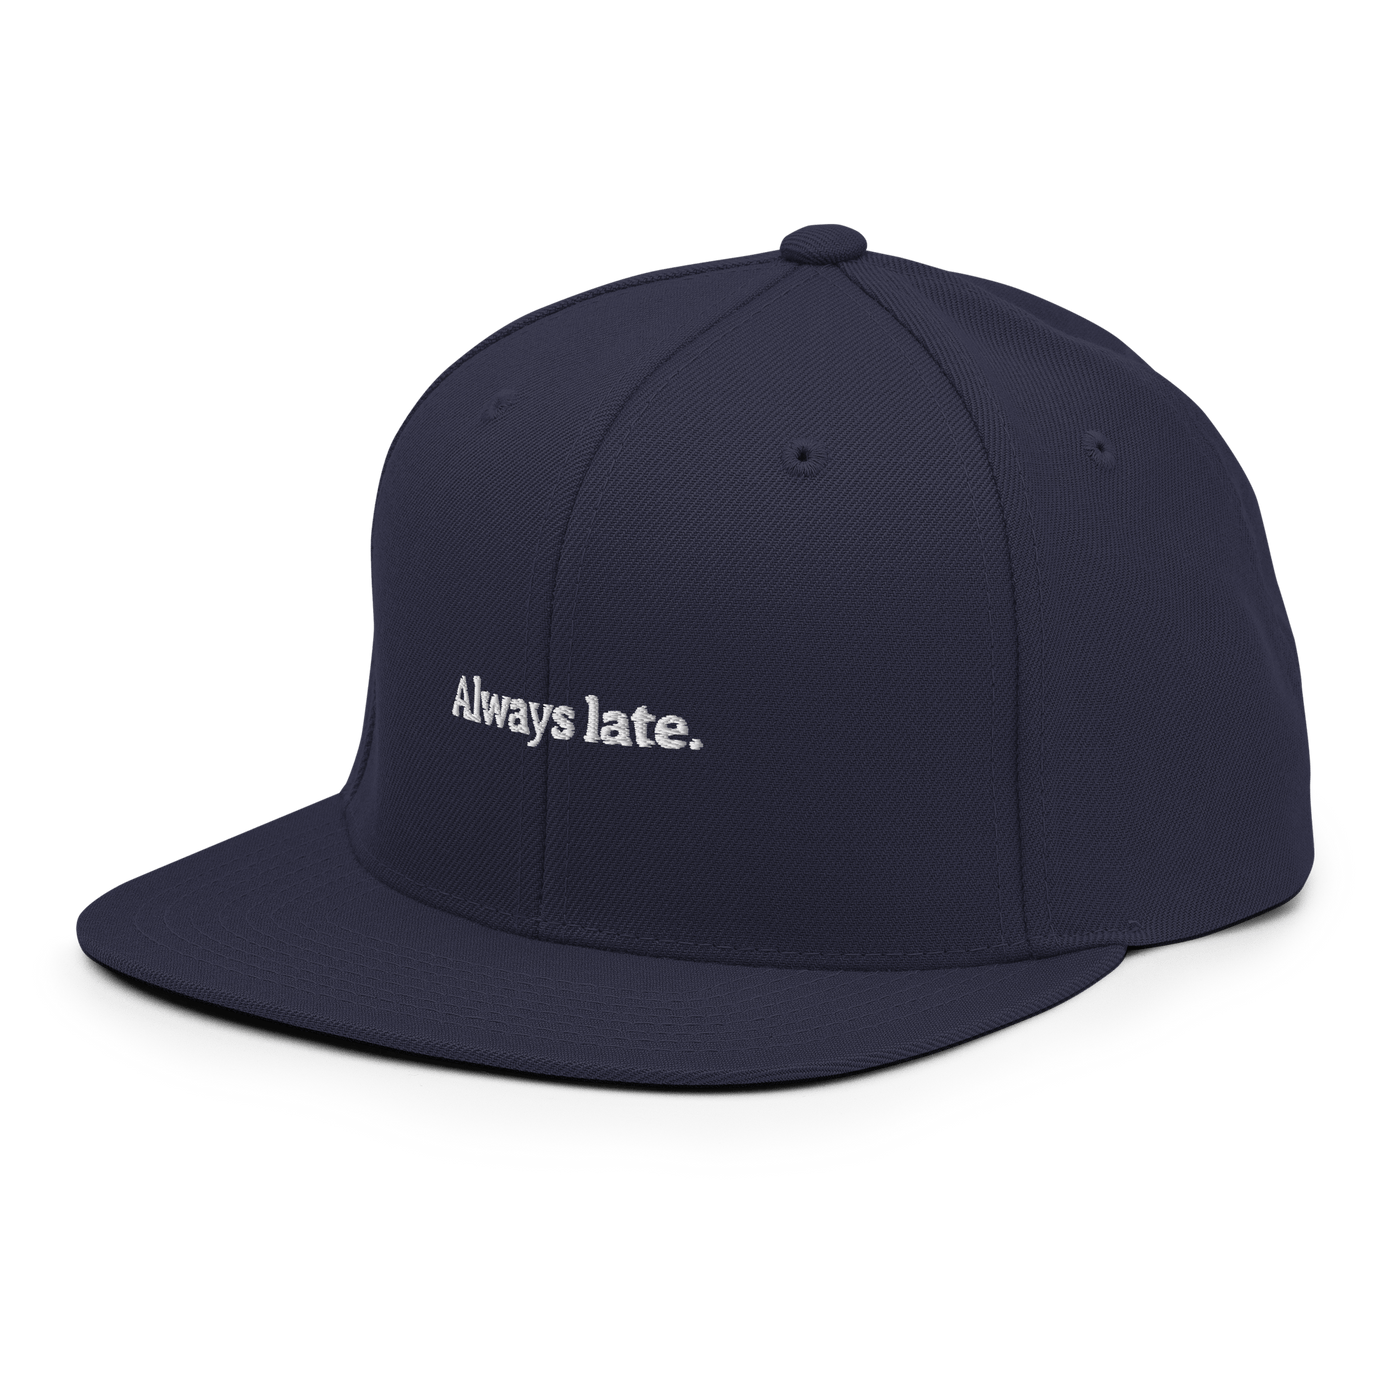 Always Late. Snapback Hat - Navy - - Just Another Cap Store